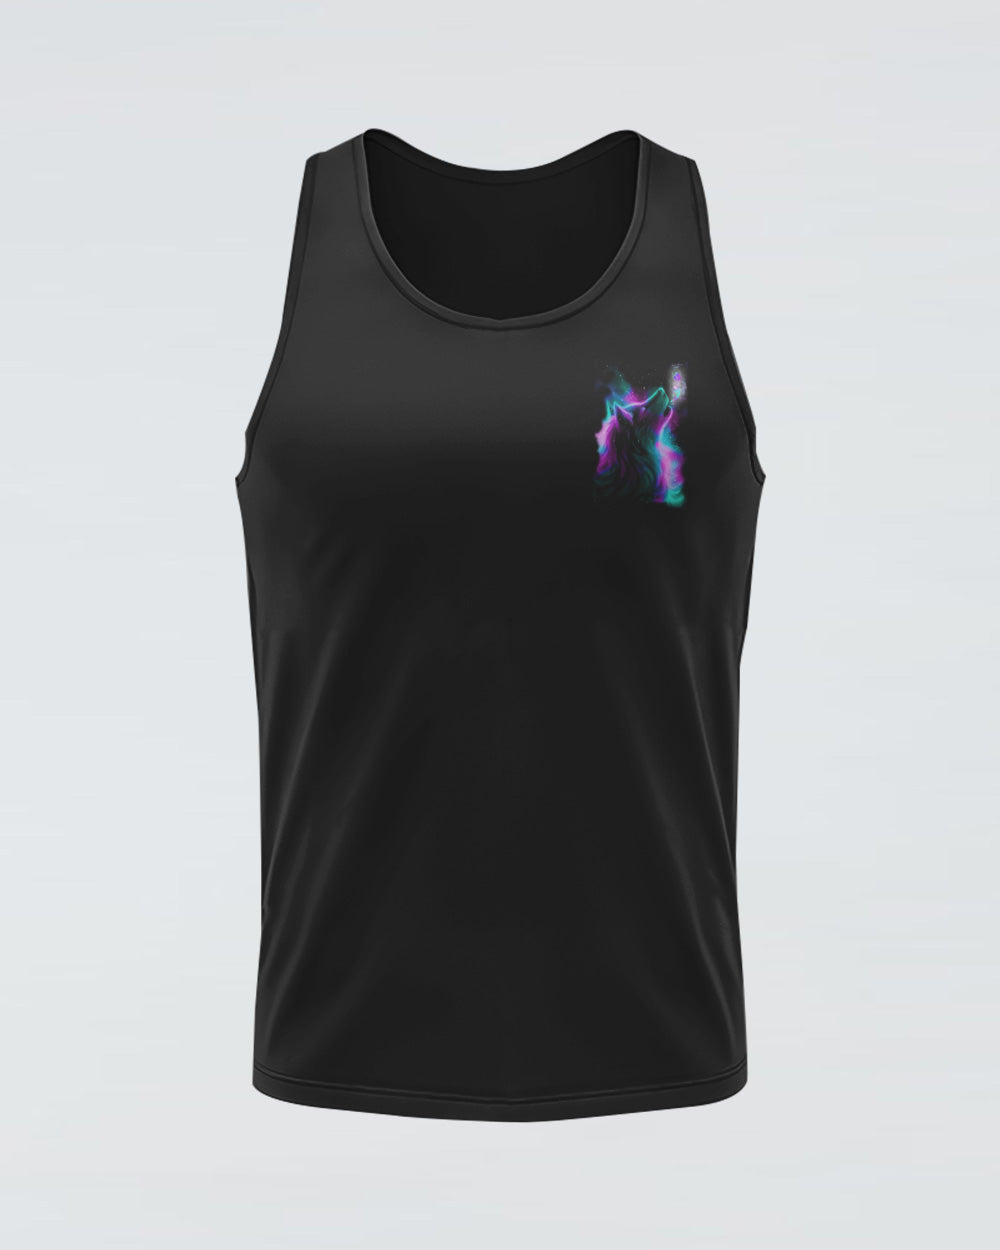 Still Here Still Fighting Wolf Colorful Women's Suicide Prevention Awareness Tanks